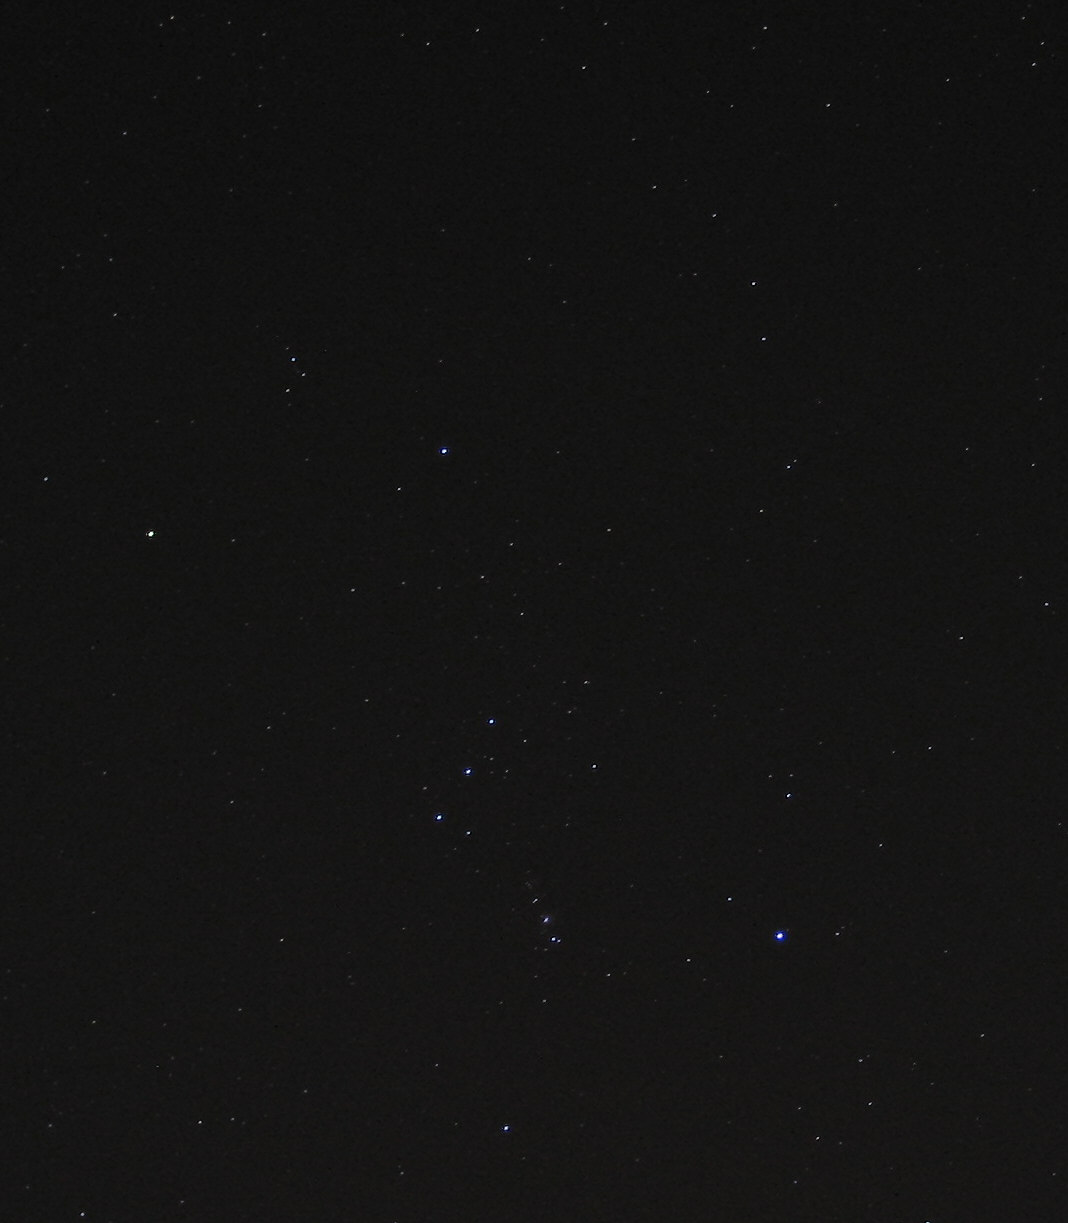 Orion-15-1